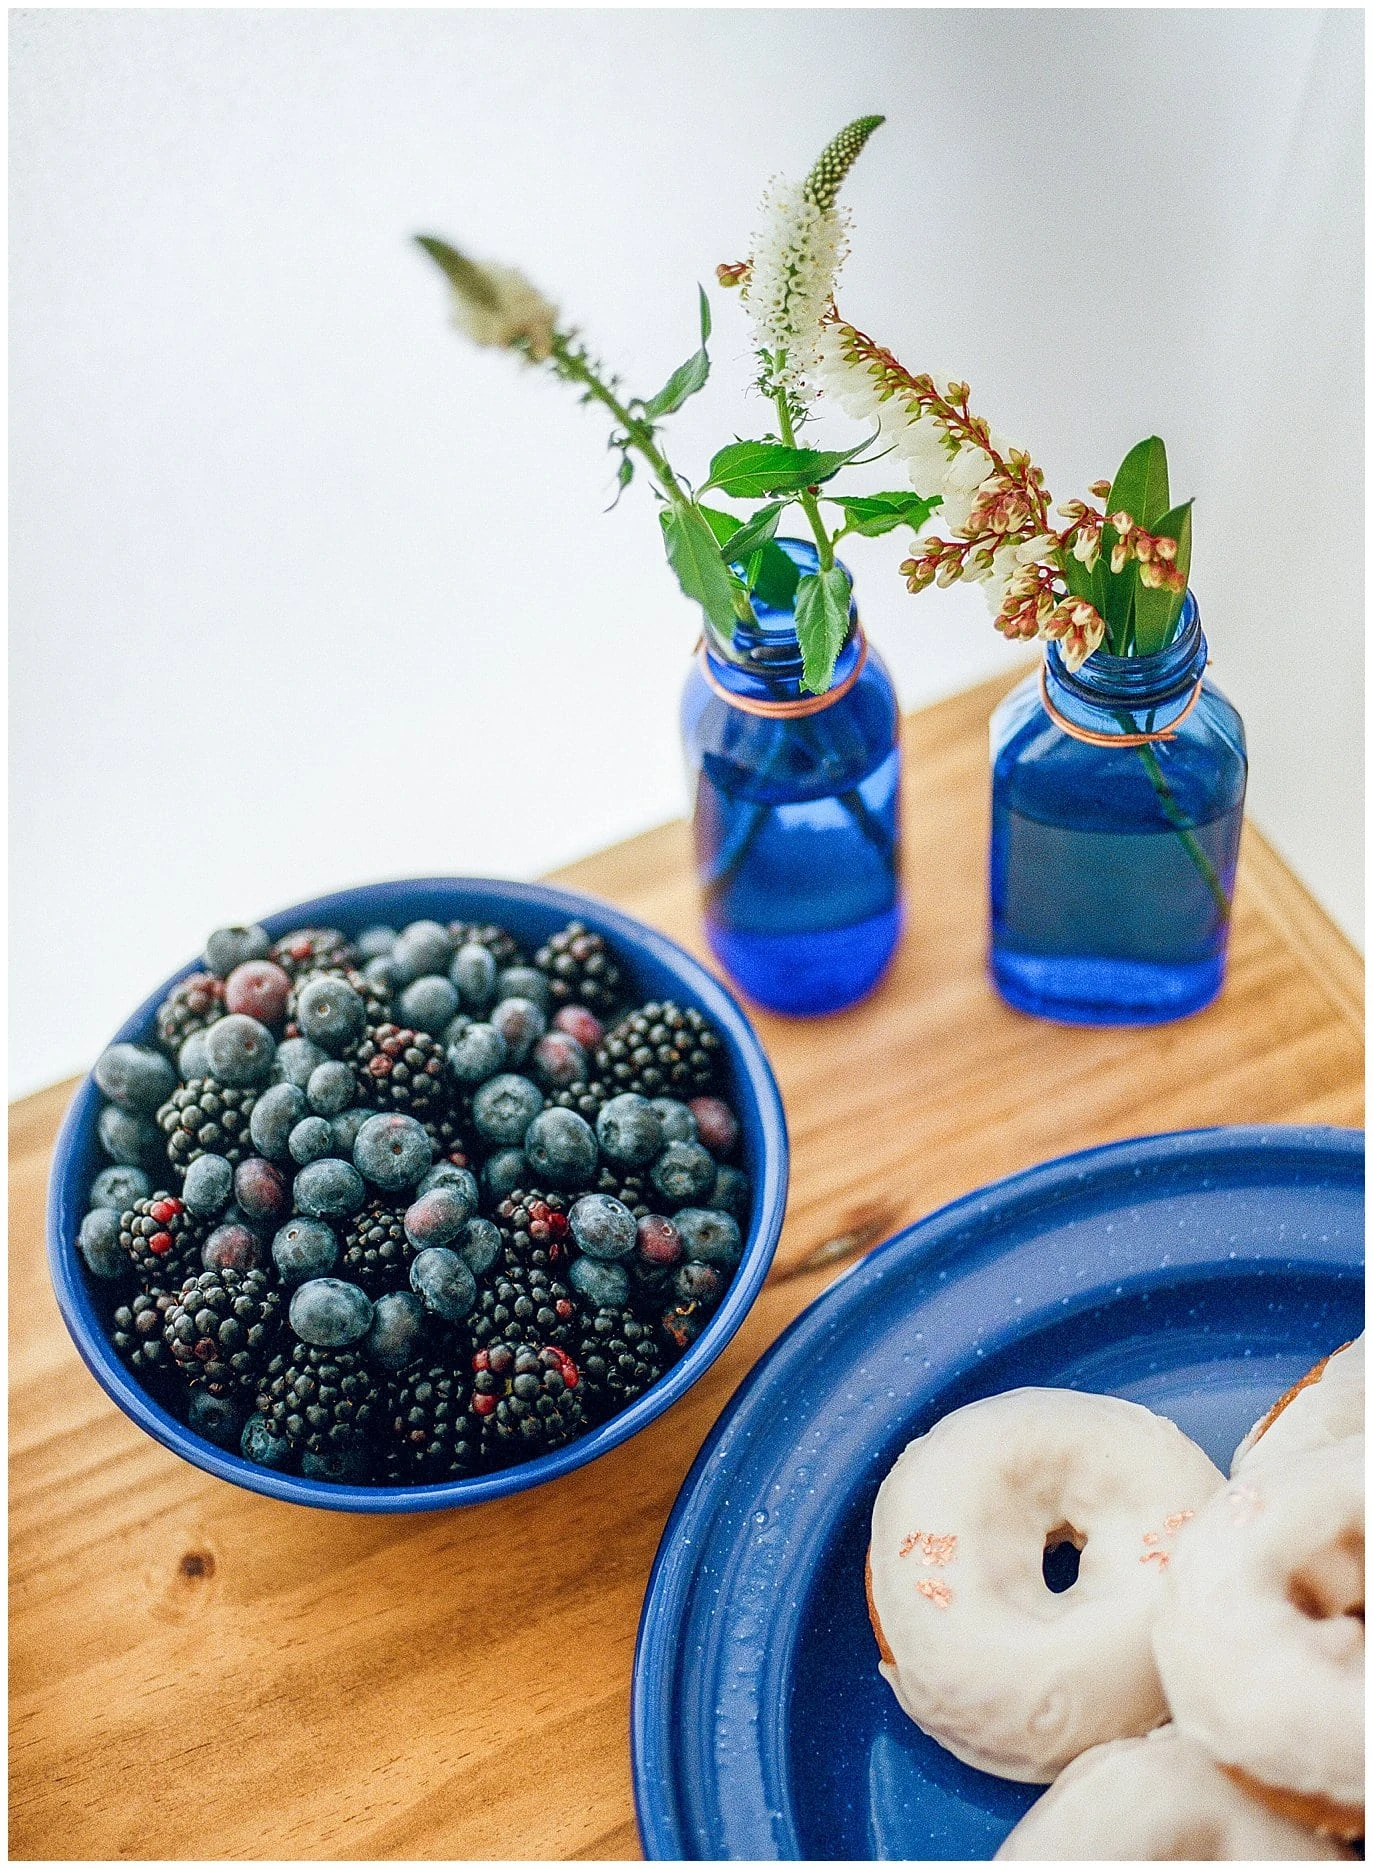 wedding glamping breakfast in bed with blueberries, glazed donuts, and blue metal plates